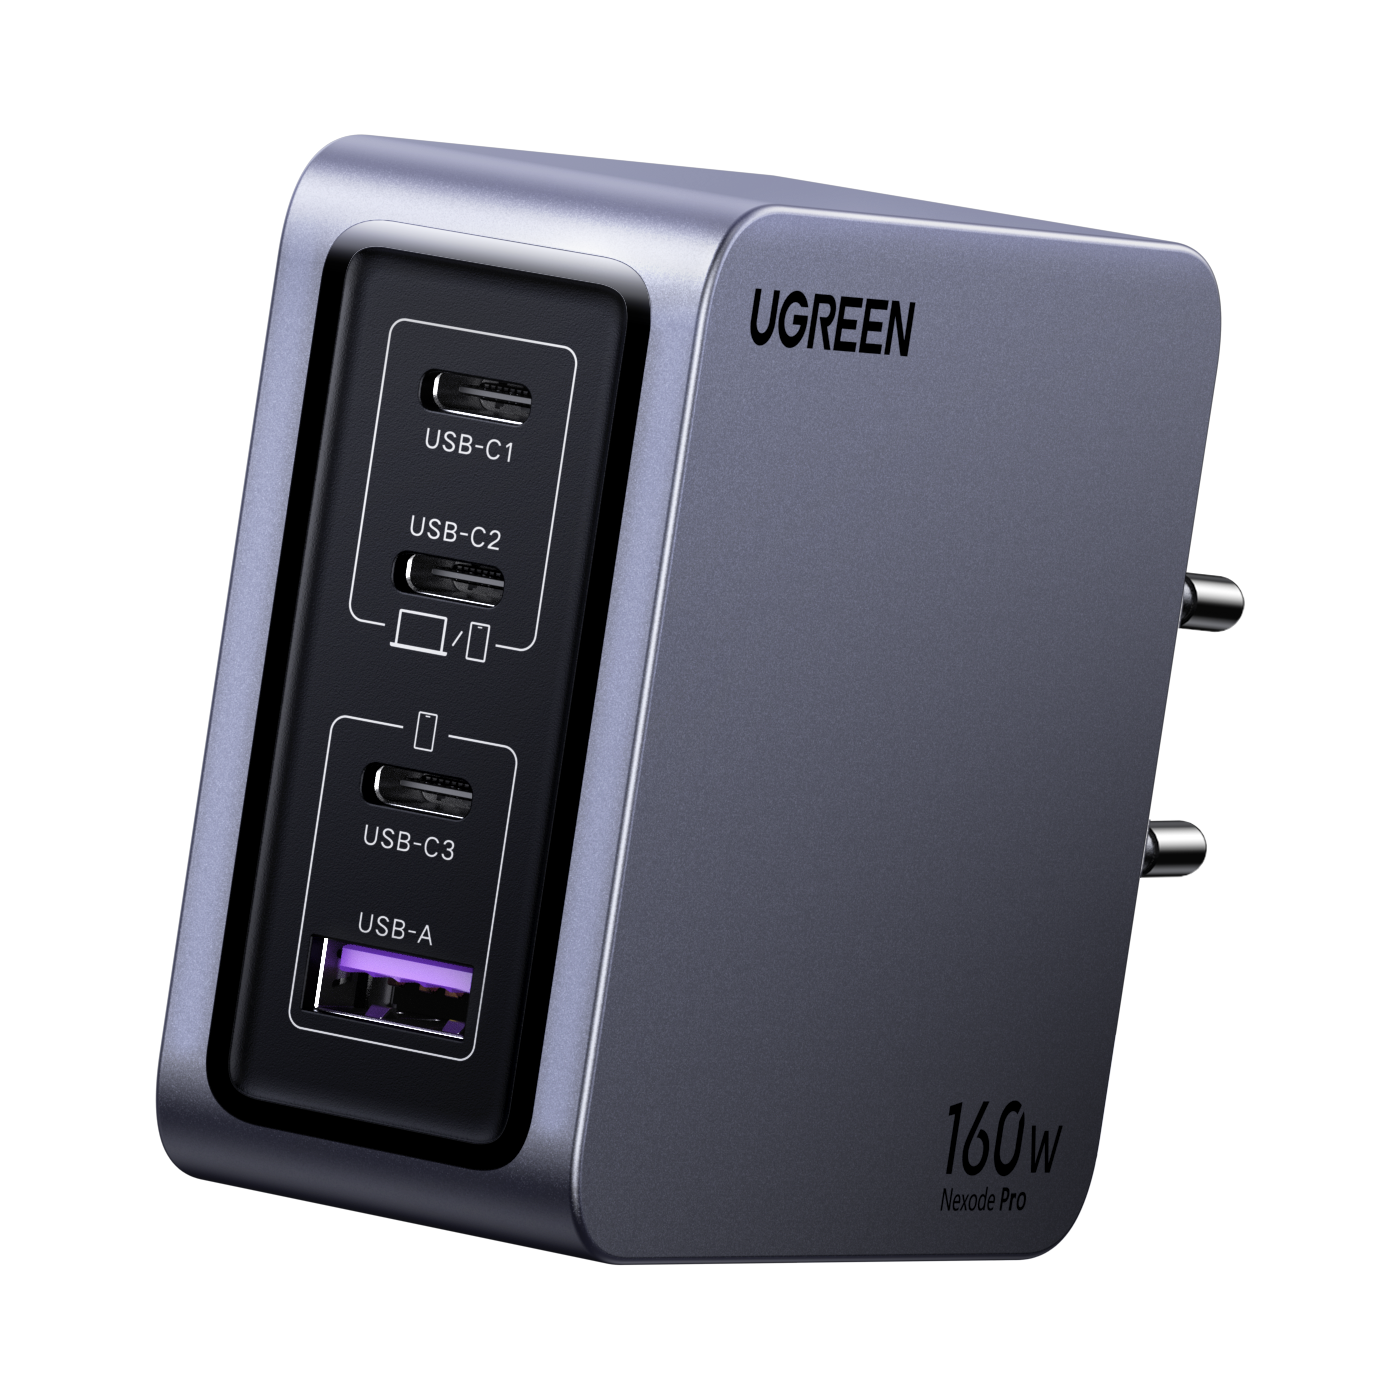 Ugreen Nexode Pro 160W Charger Review: Multi-device Travel Companion